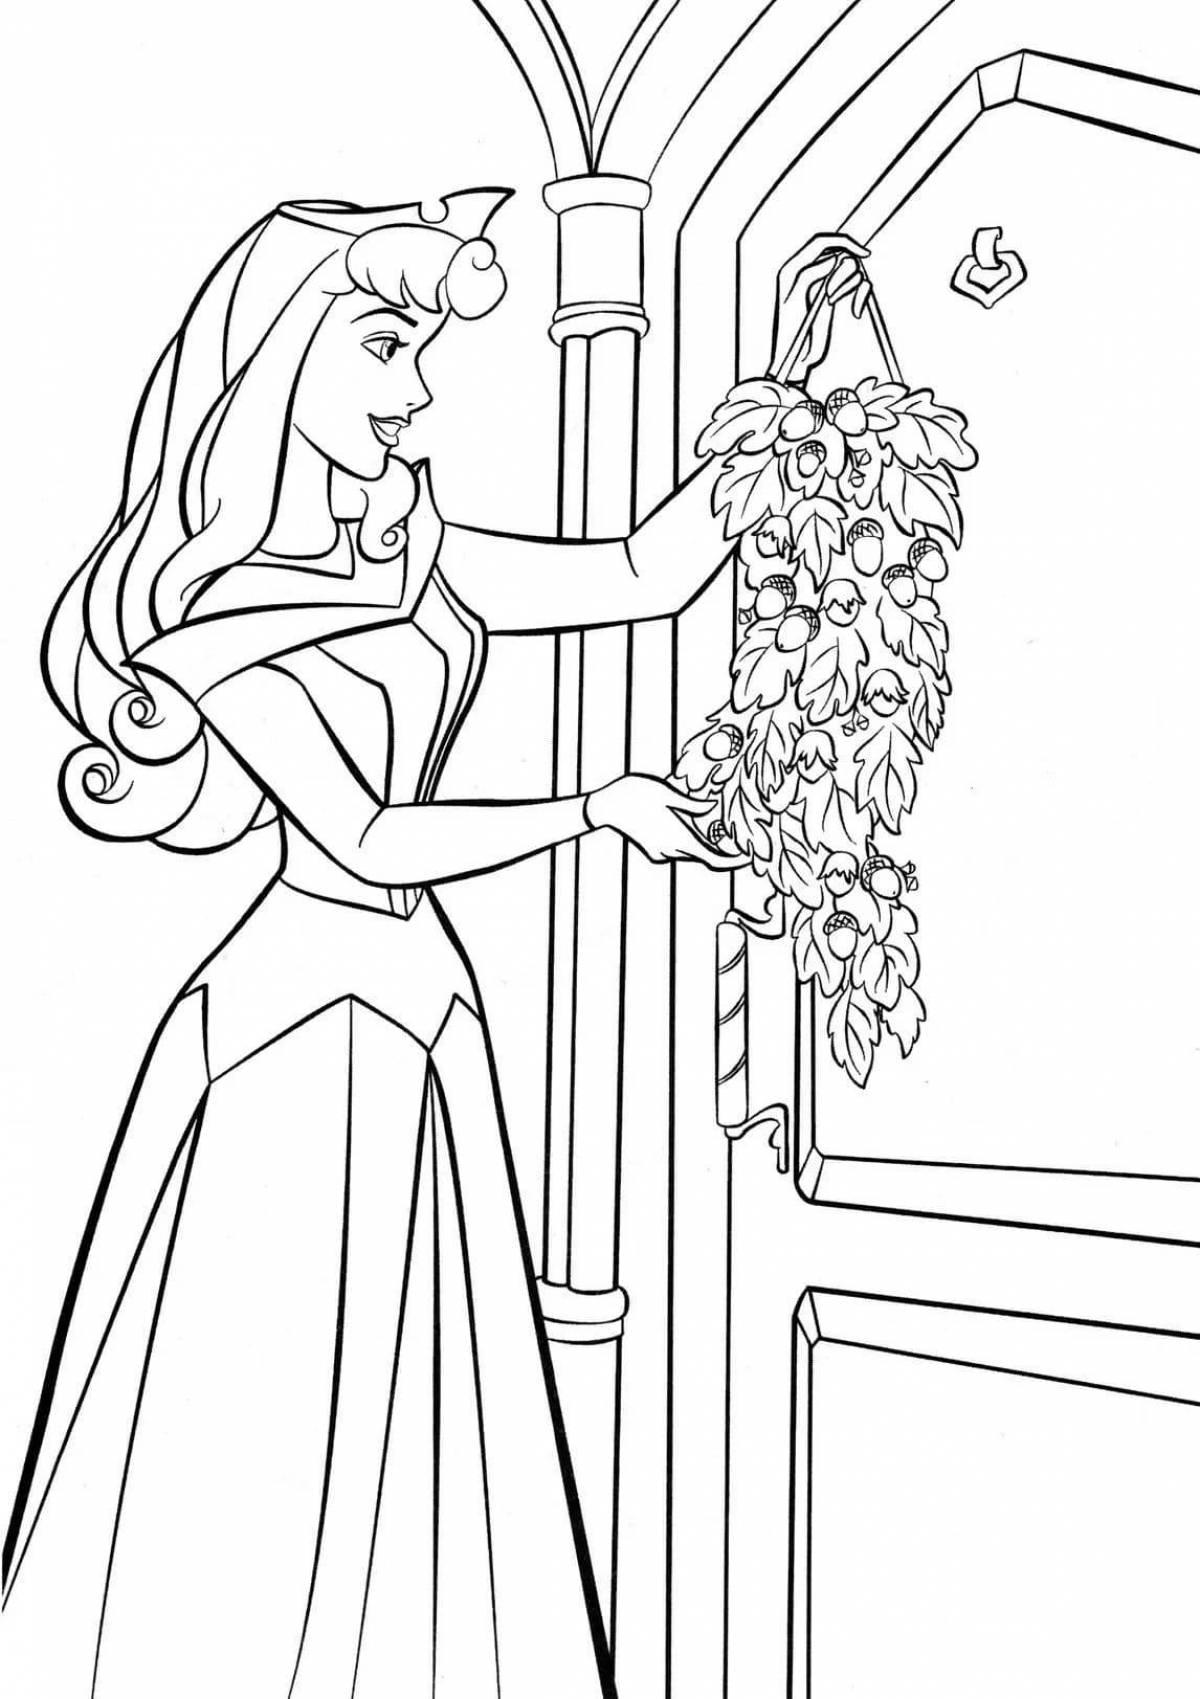 Blessed Aurora coloring page